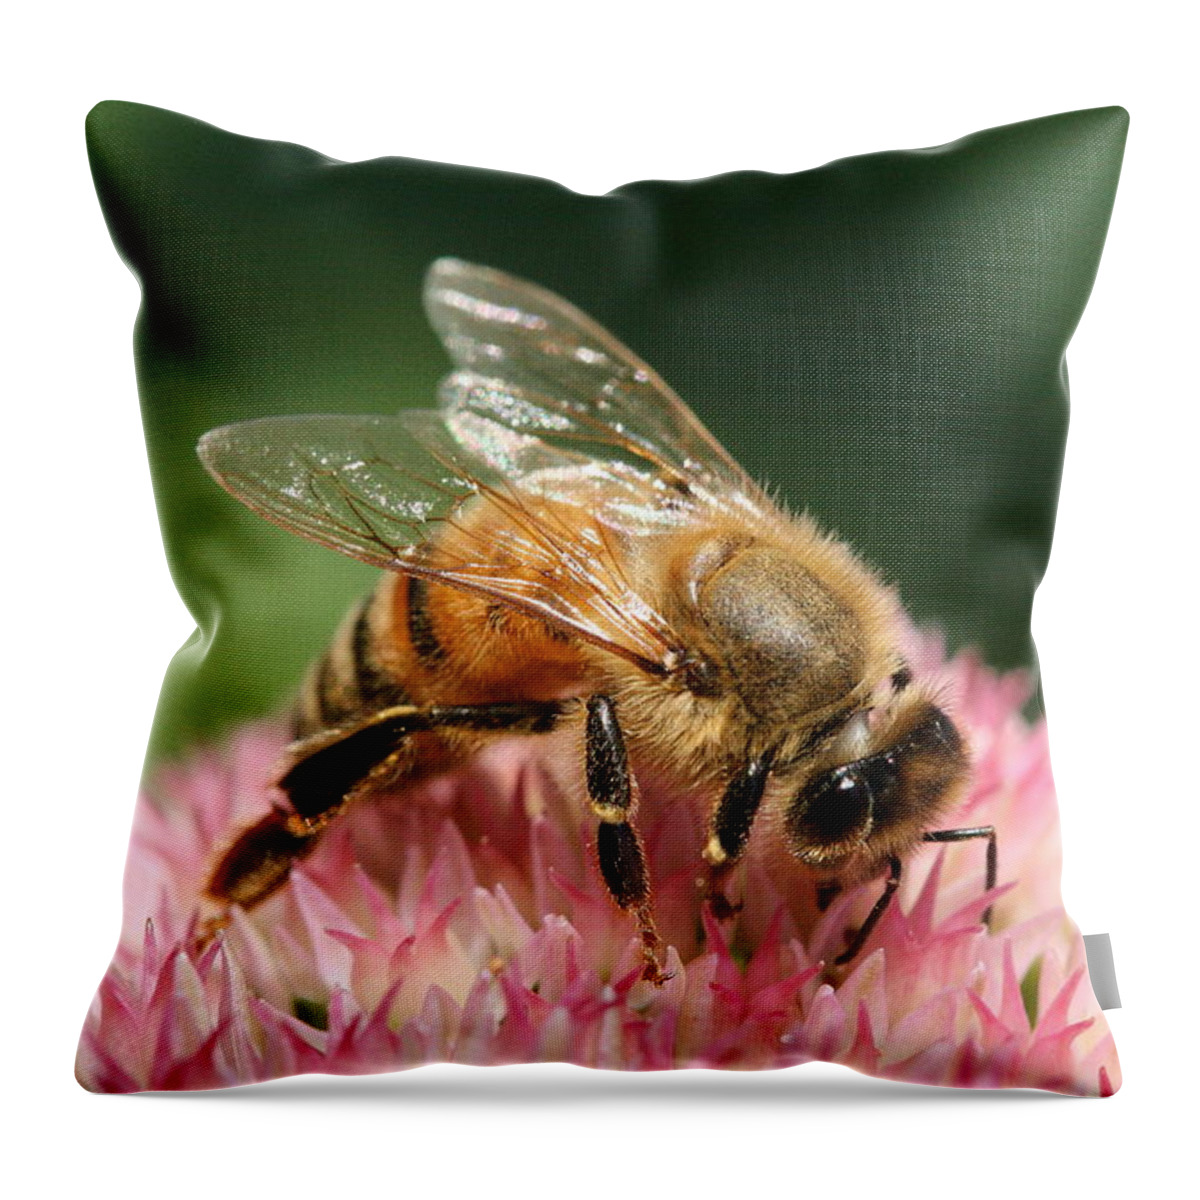 Bee Throw Pillow featuring the photograph Arched by Angela Rath